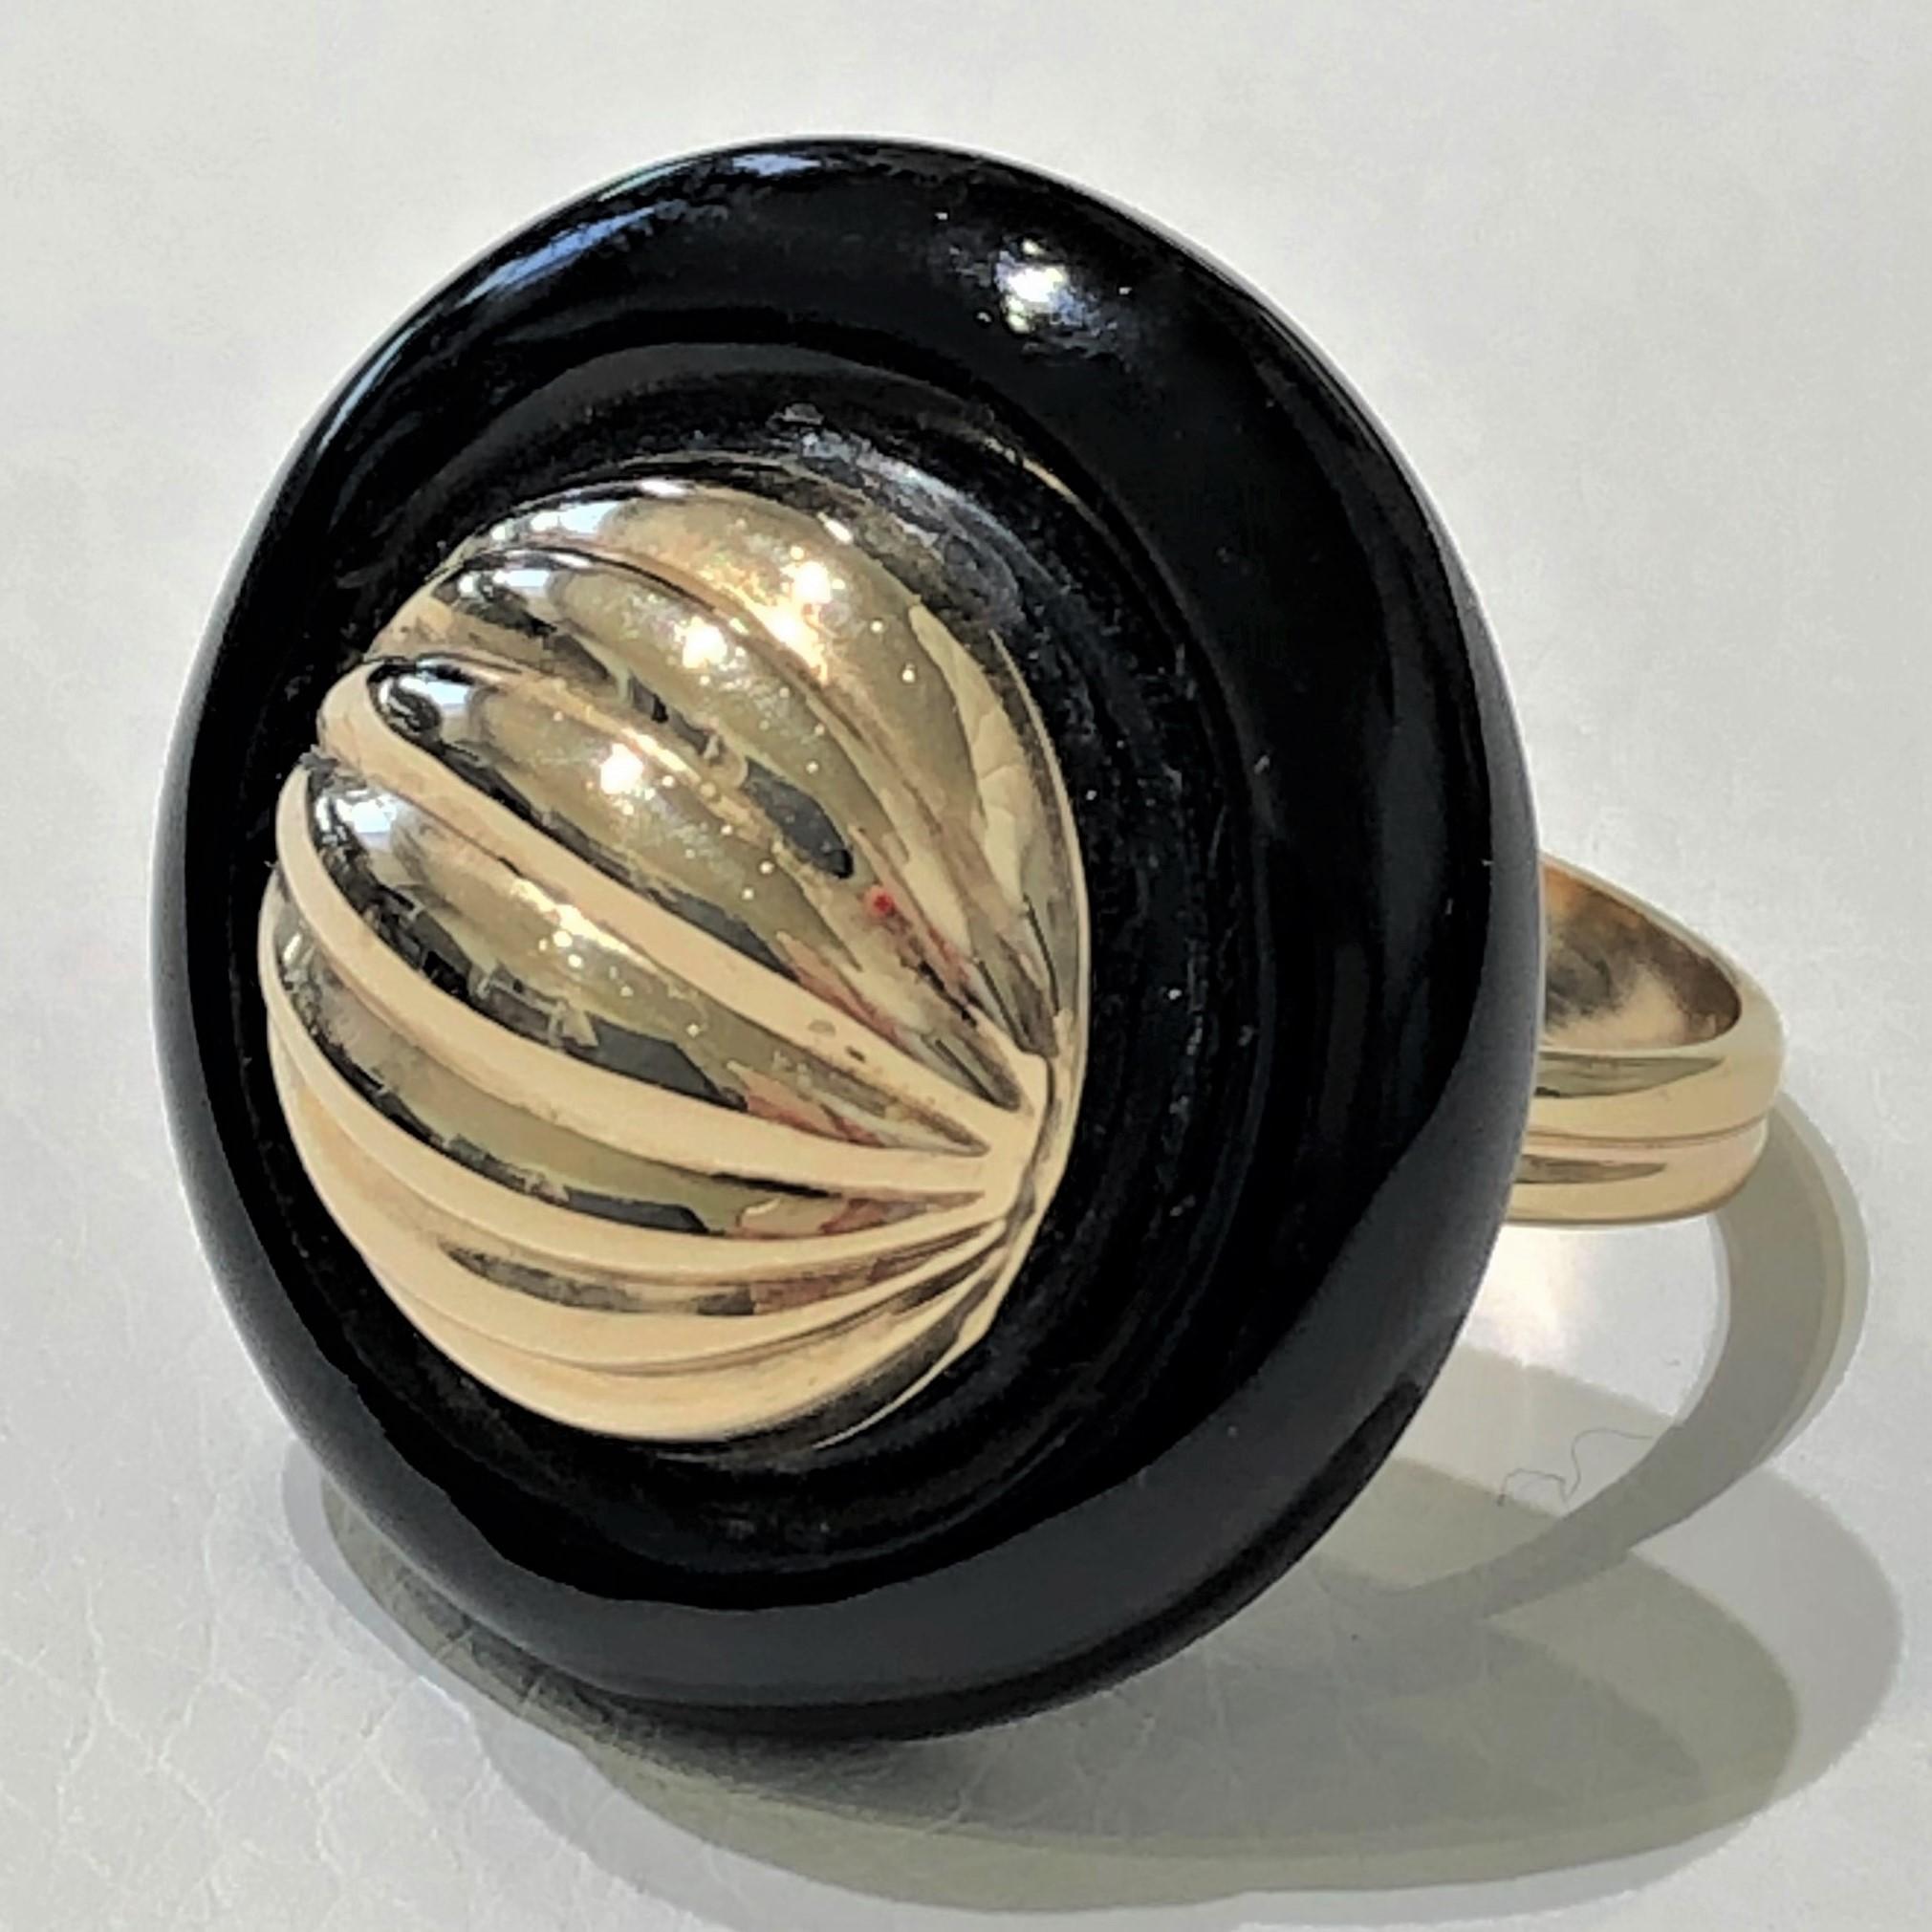 This smart, tailored, Onyx ring sports a fluted 14K gold dome center. Lightweight and comfortable to wear, it is a great every day piece. The ring is presently Size 7 and is
sizeable.  Diameter is 1 1/16 inch. Gross weight 11.3 grams.
